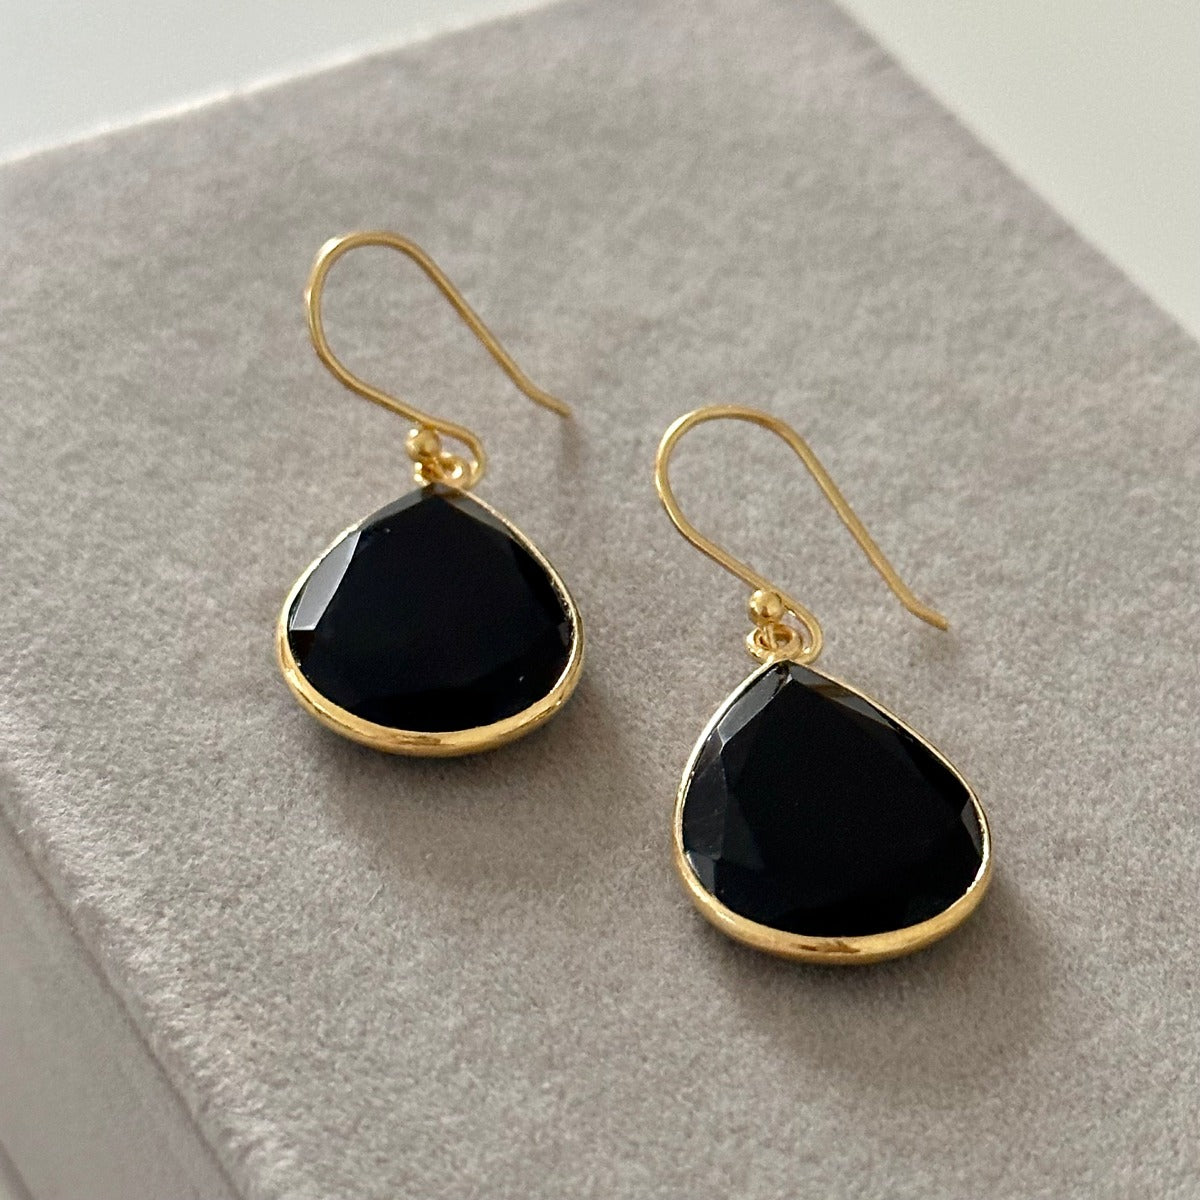 Black Onyx Gold Plated Sterling Silver Earrings with a Tear Drop Shaped Gemstone - Milina London